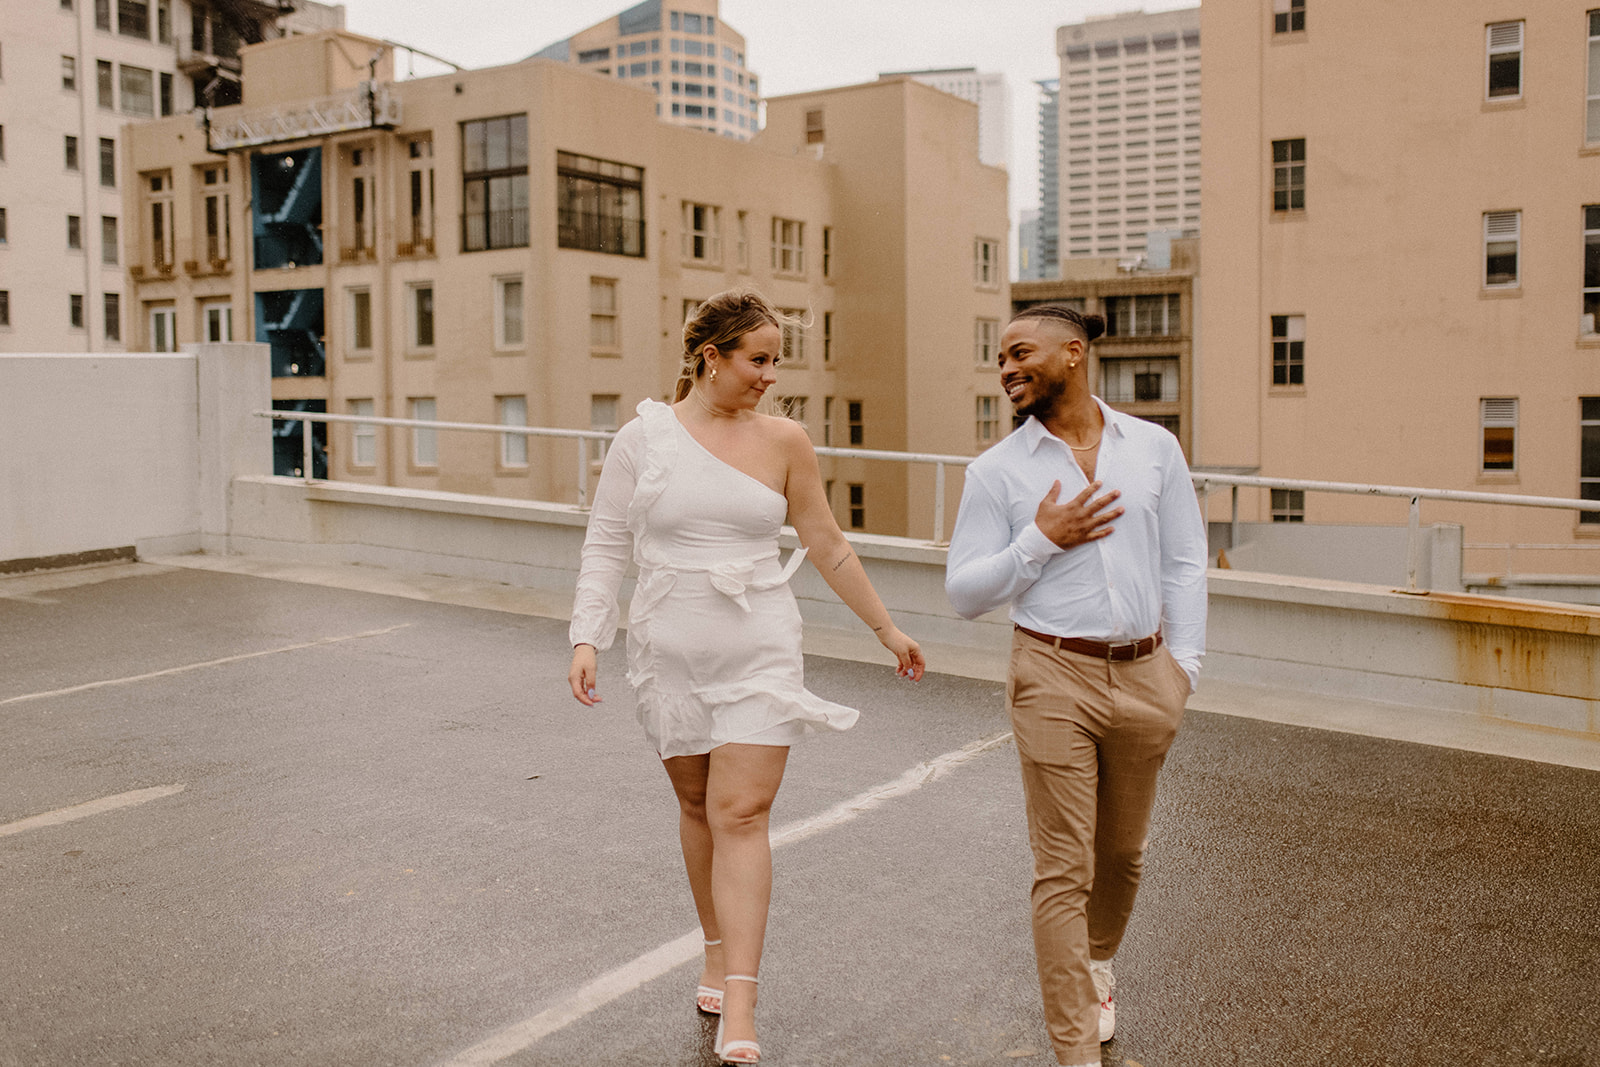 Couples photos in the rain for a rooftop engagement session
